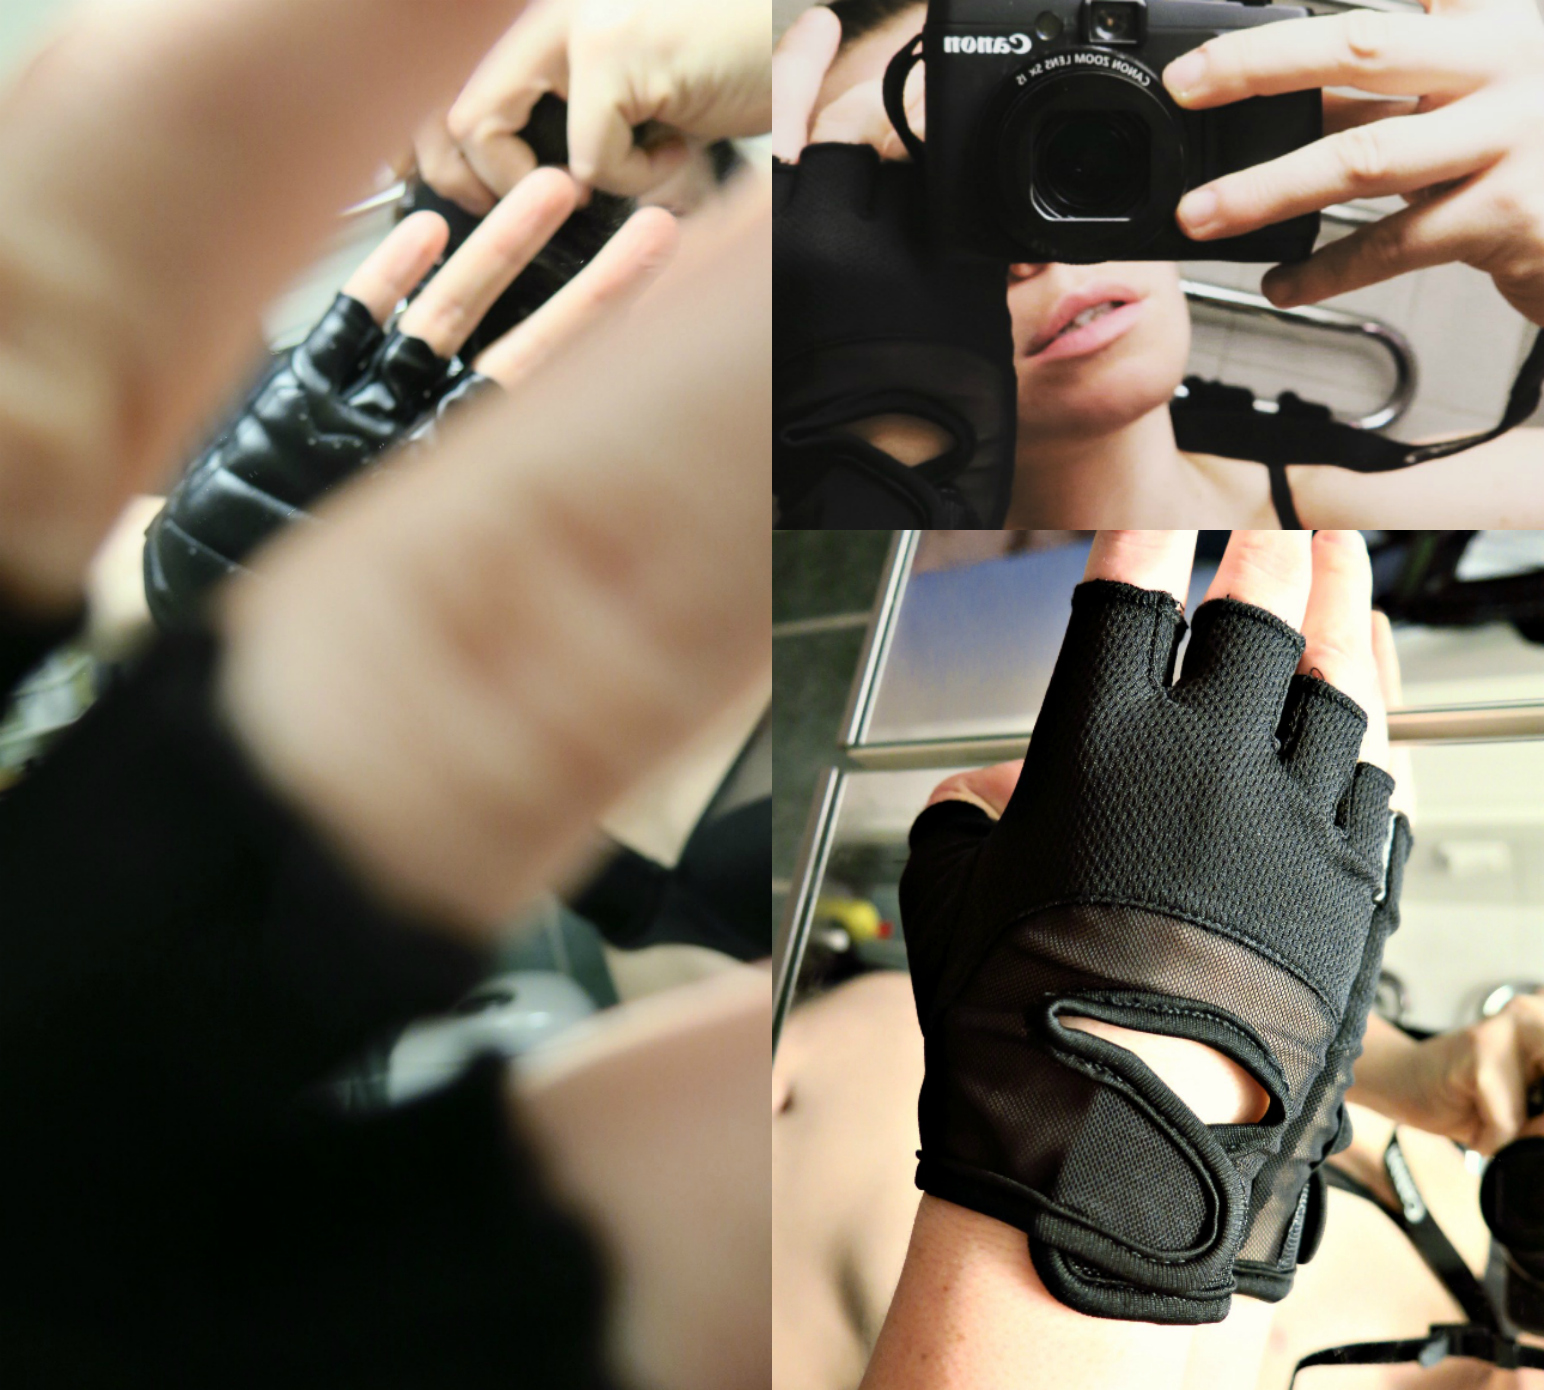 Sexy bike gloves, unexpected